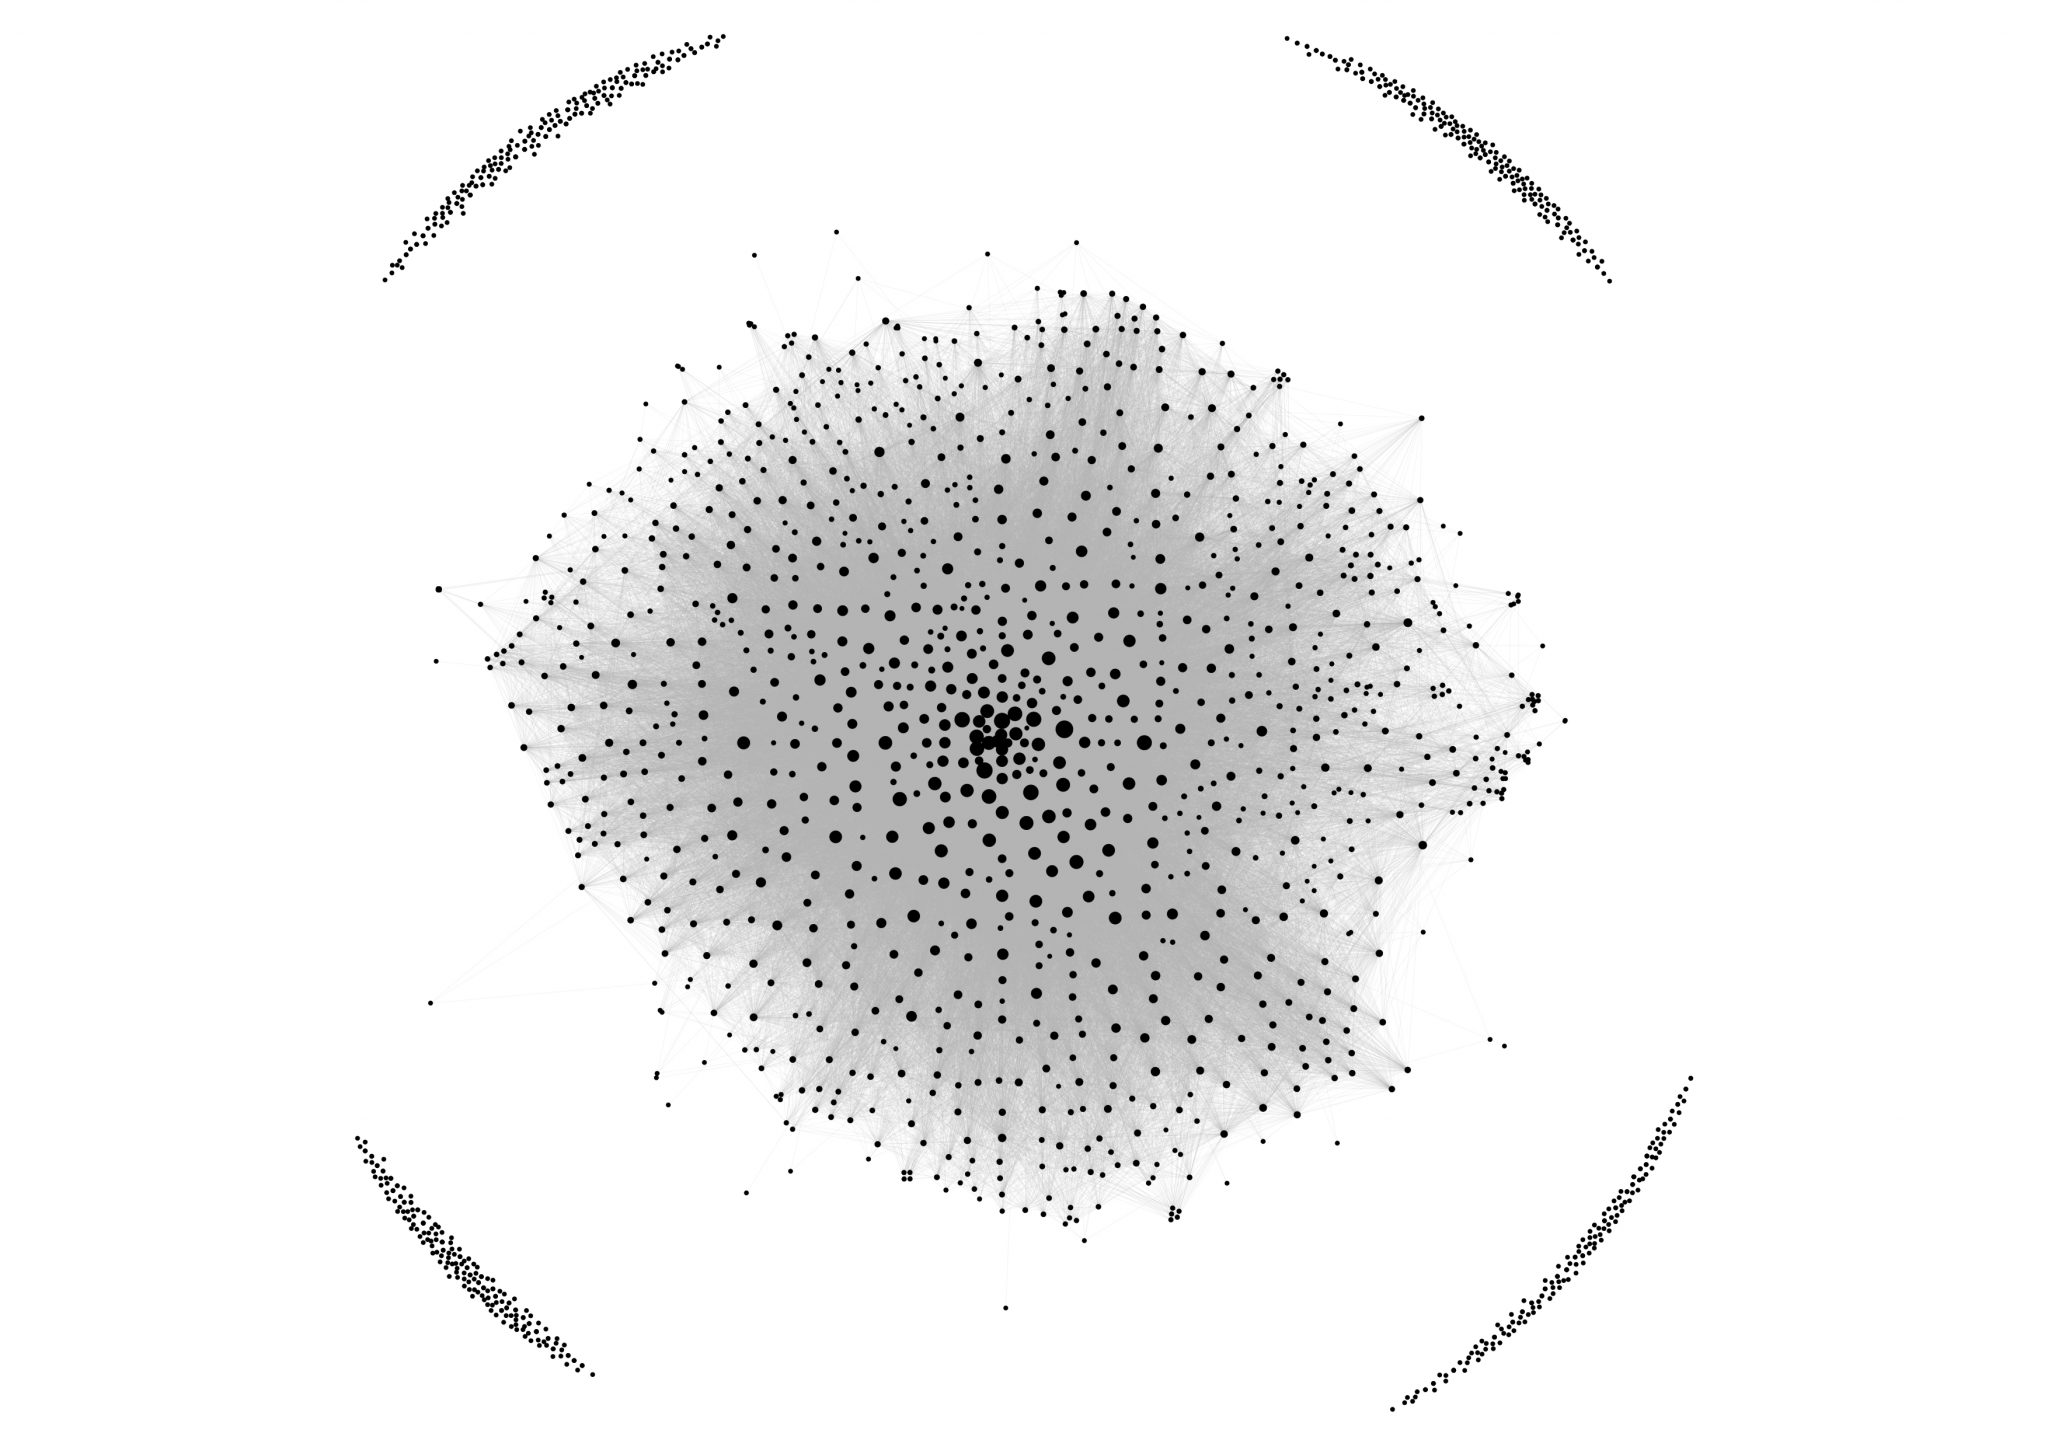 Network of references among books on the history of Venice